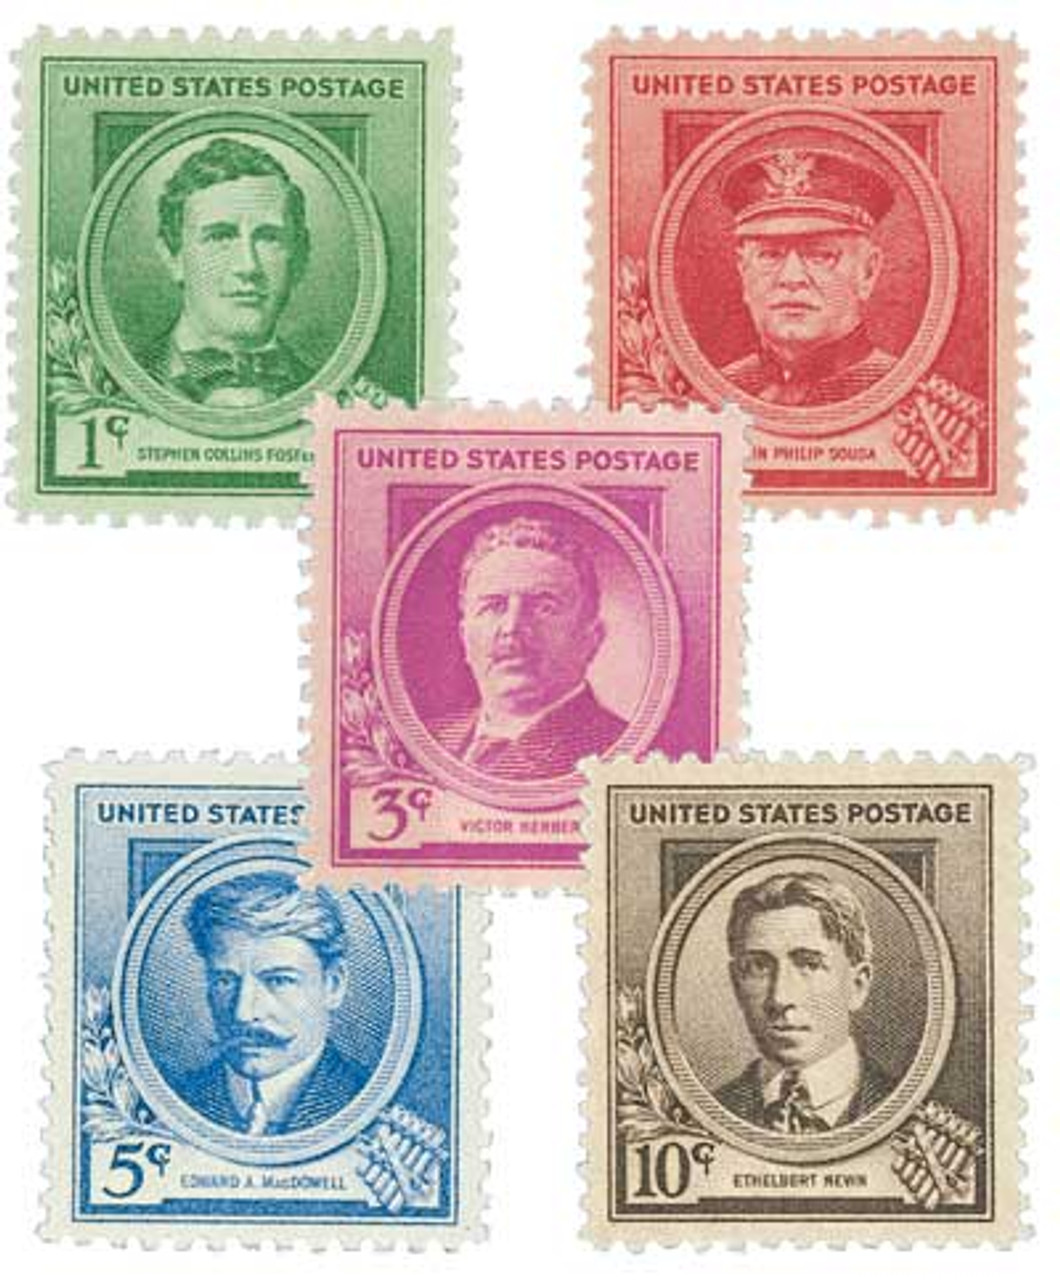 Famous US postage stamps